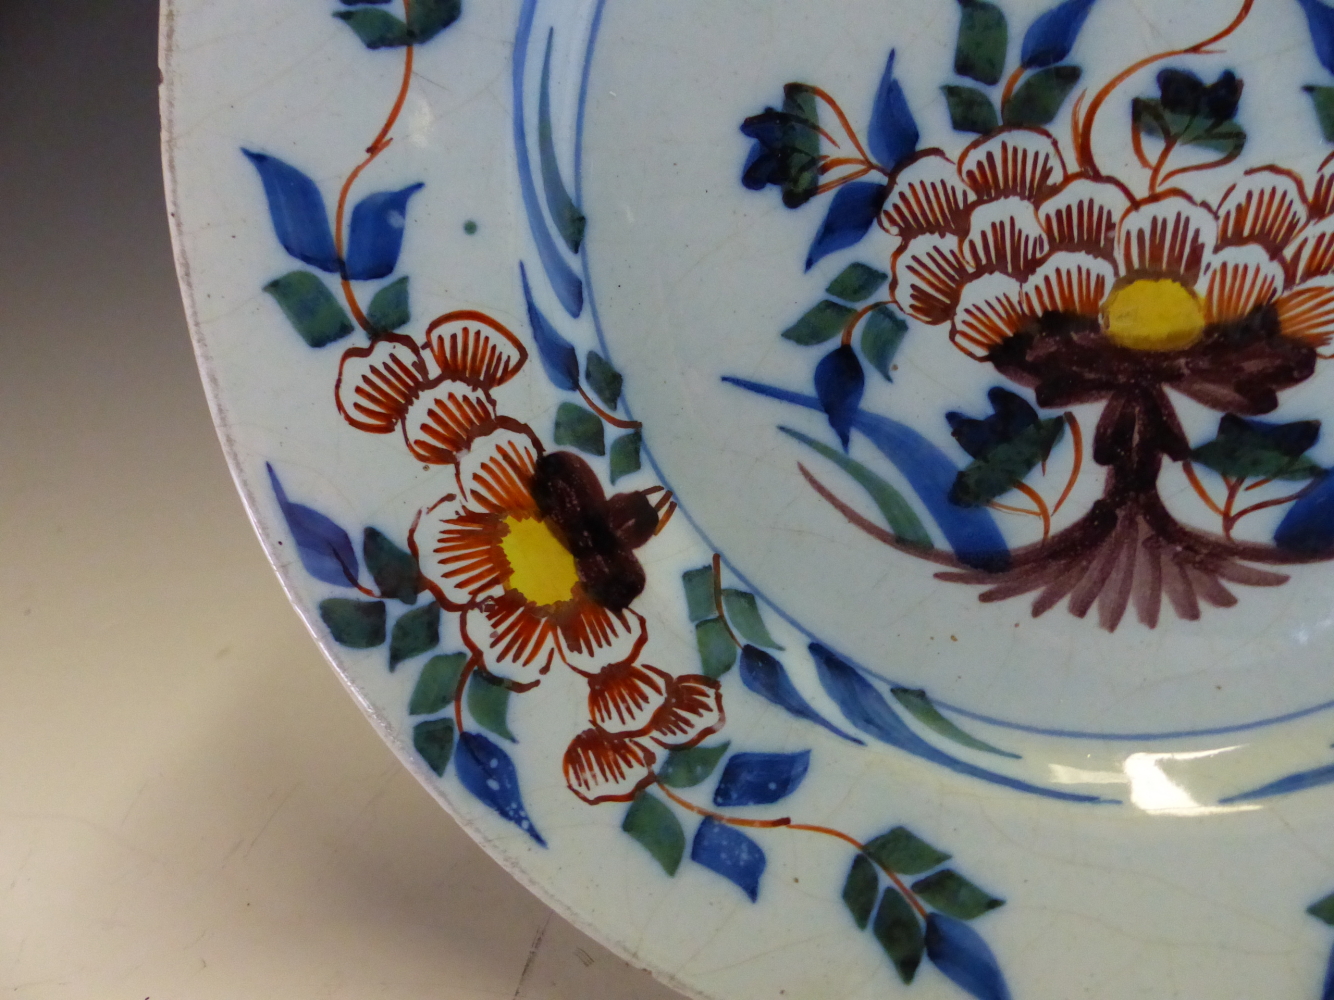 A PAIR OF 18th C. ENGLISH DELFT POLYCHROME PLATES PAINTED WITH YELLOW CENTRED RED FLOWERS WITHIN - Image 8 of 10